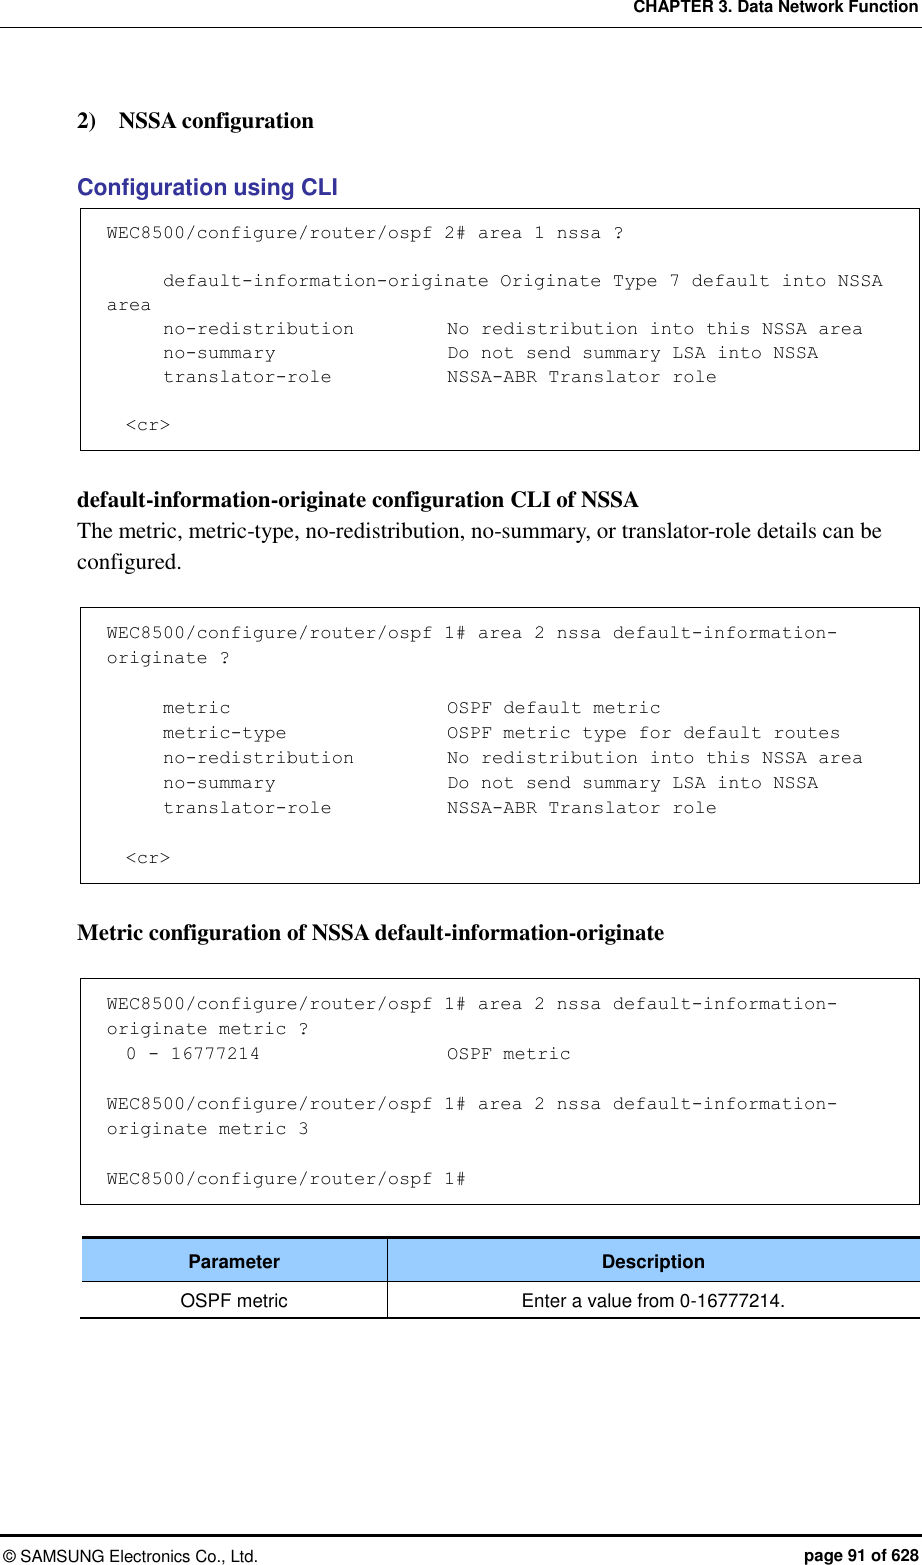 CHAPTER 3. Data Network Function ©  SAMSUNG Electronics Co., Ltd.  page 91 of 628 2)    NSSA configuration  Configuration using CLI WEC8500/configure/router/ospf 2# area 1 nssa ?        default-information-originate Originate Type 7 default into NSSA area       no-redistribution          No redistribution into this NSSA area       no-summary                  Do not send summary LSA into NSSA       translator-role            NSSA-ABR Translator role    &lt;cr&gt;  default-information-originate configuration CLI of NSSA   The metric, metric-type, no-redistribution, no-summary, or translator-role details can be configured.    WEC8500/configure/router/ospf 1# area 2 nssa default-information-originate ?        metric                       OSPF default metric       metric-type              OSPF metric type for default routes       no-redistribution          No redistribution into this NSSA area       no-summary                   Do not send summary LSA into NSSA       translator-role            NSSA-ABR Translator role    &lt;cr&gt;  Metric configuration of NSSA default-information-originate    WEC8500/configure/router/ospf 1# area 2 nssa default-information-originate metric ?   0 - 16777214                    OSPF metric  WEC8500/configure/router/ospf 1# area 2 nssa default-information-originate metric 3   WEC8500/configure/router/ospf 1#  Parameter Description OSPF metric Enter a value from 0-16777214.  